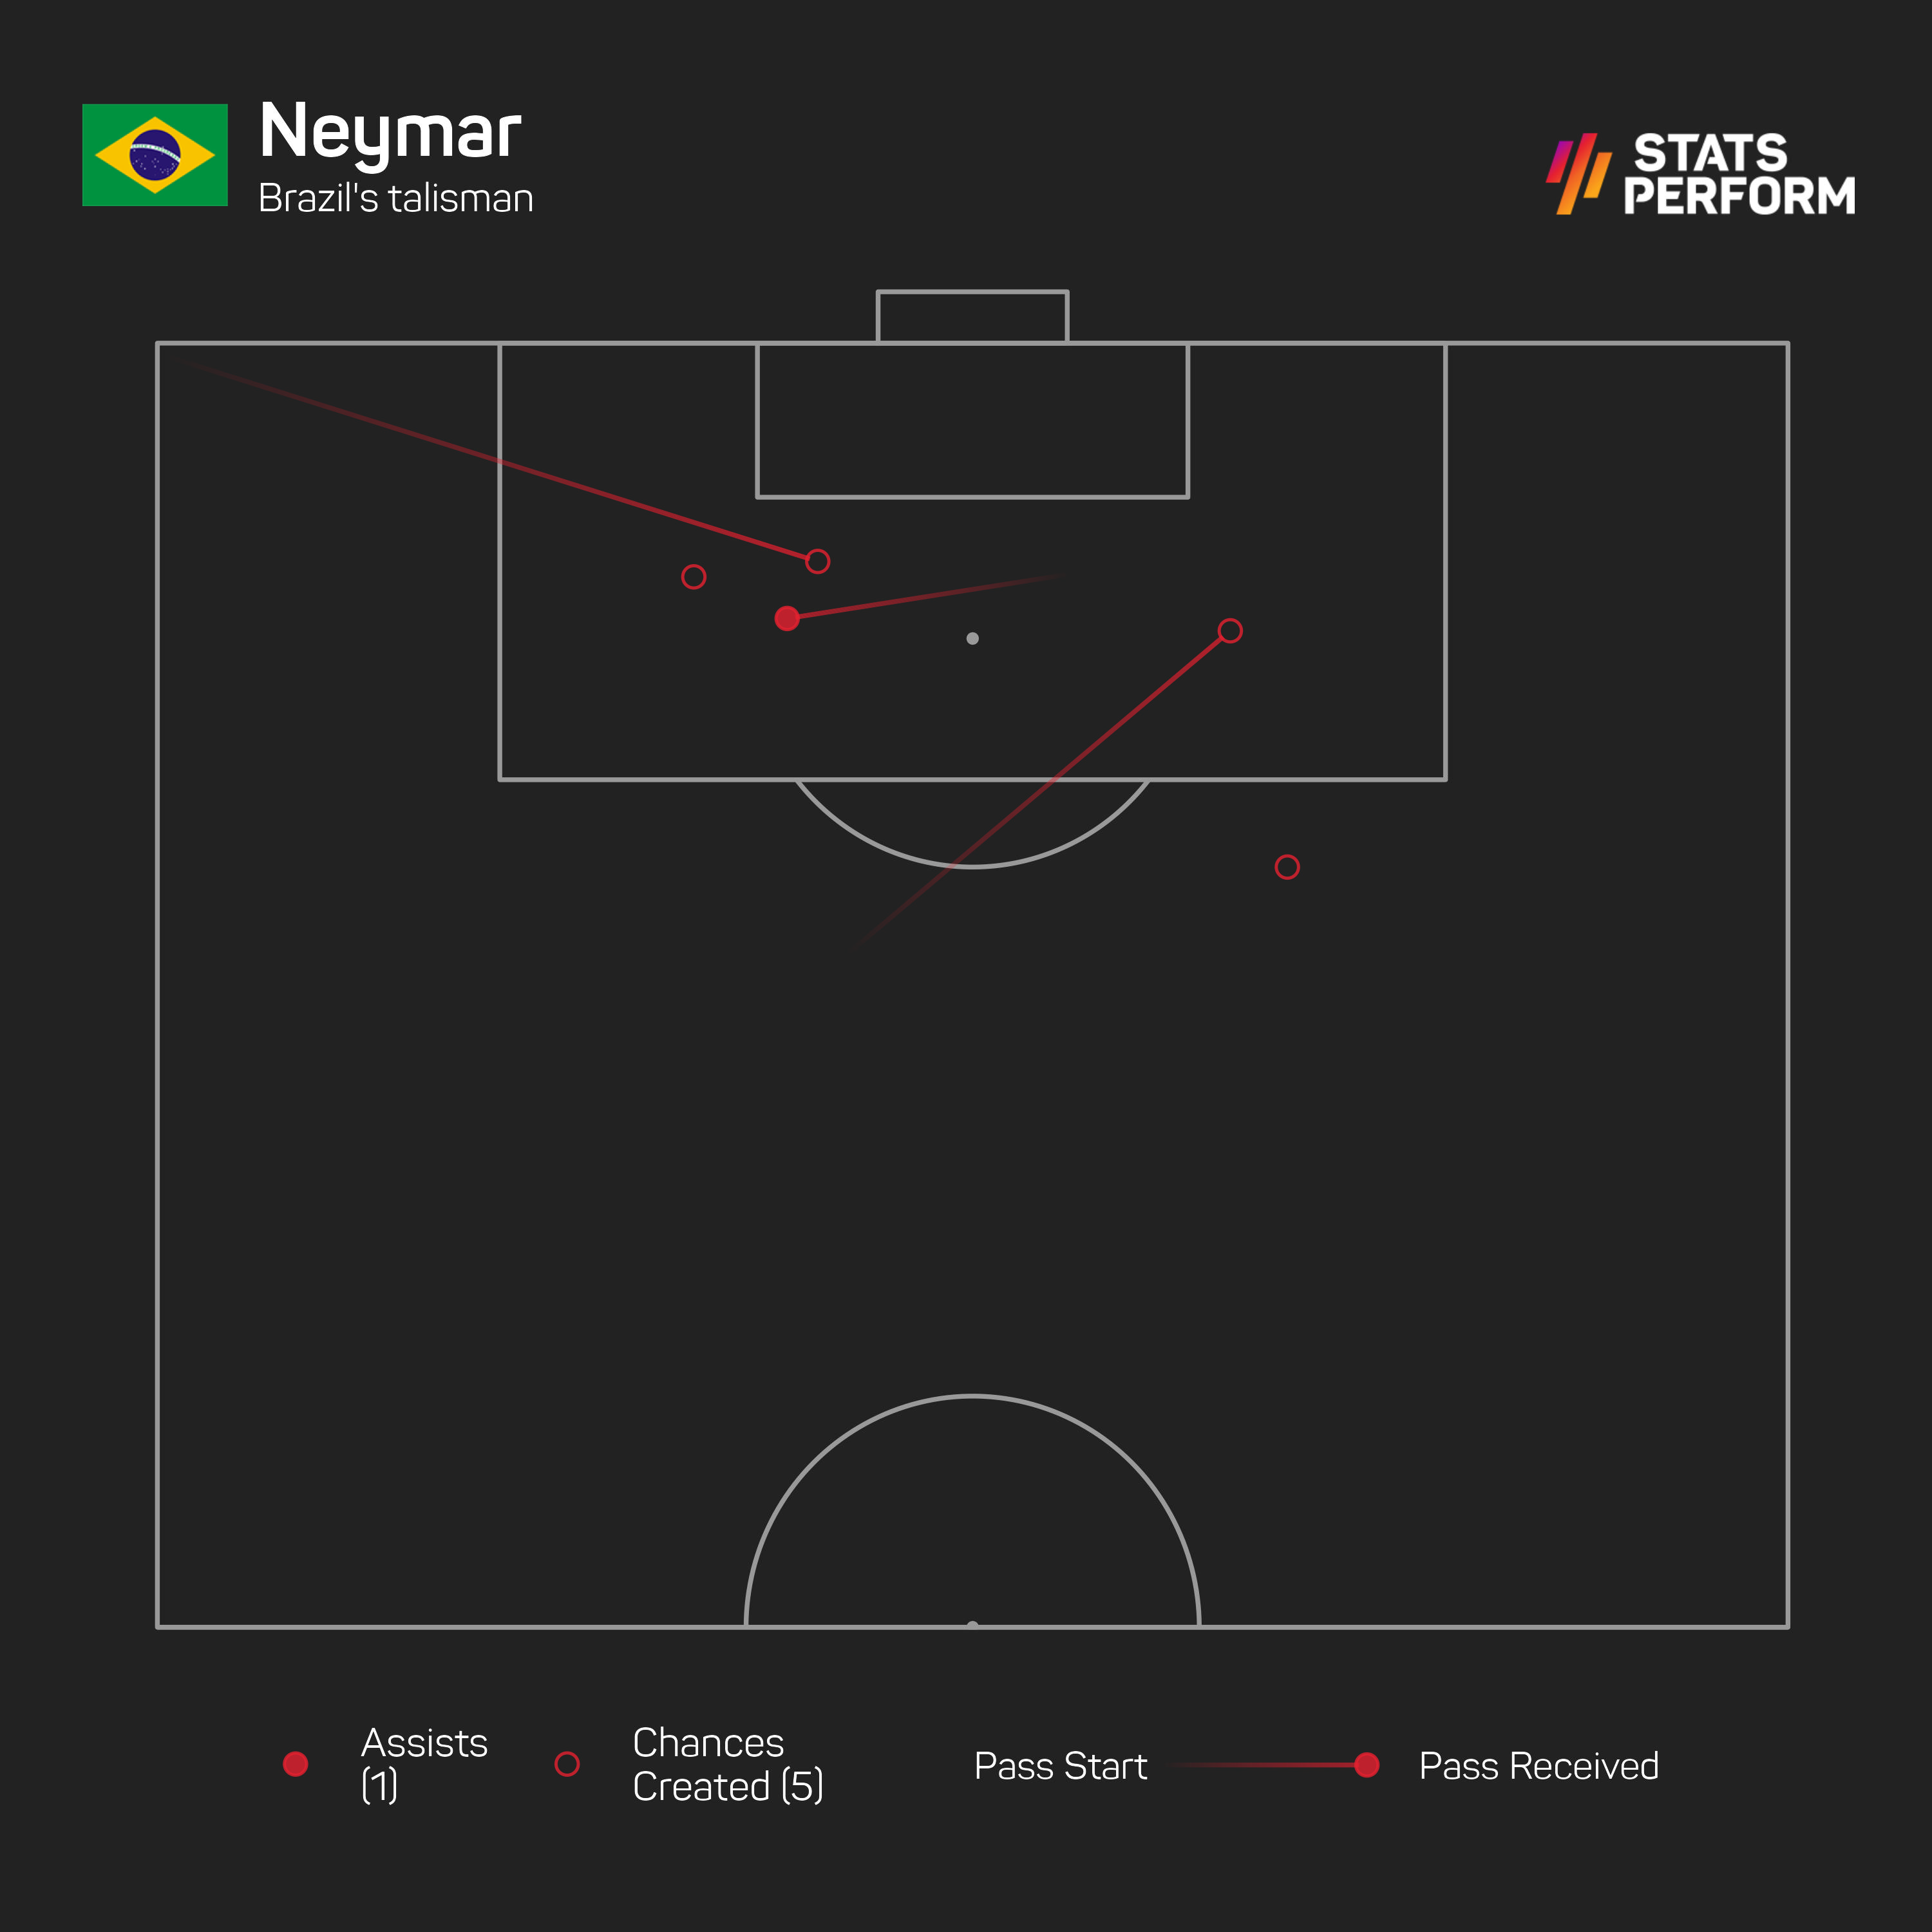 Neymar has created five chances for Brazil at the Qatar World Cup